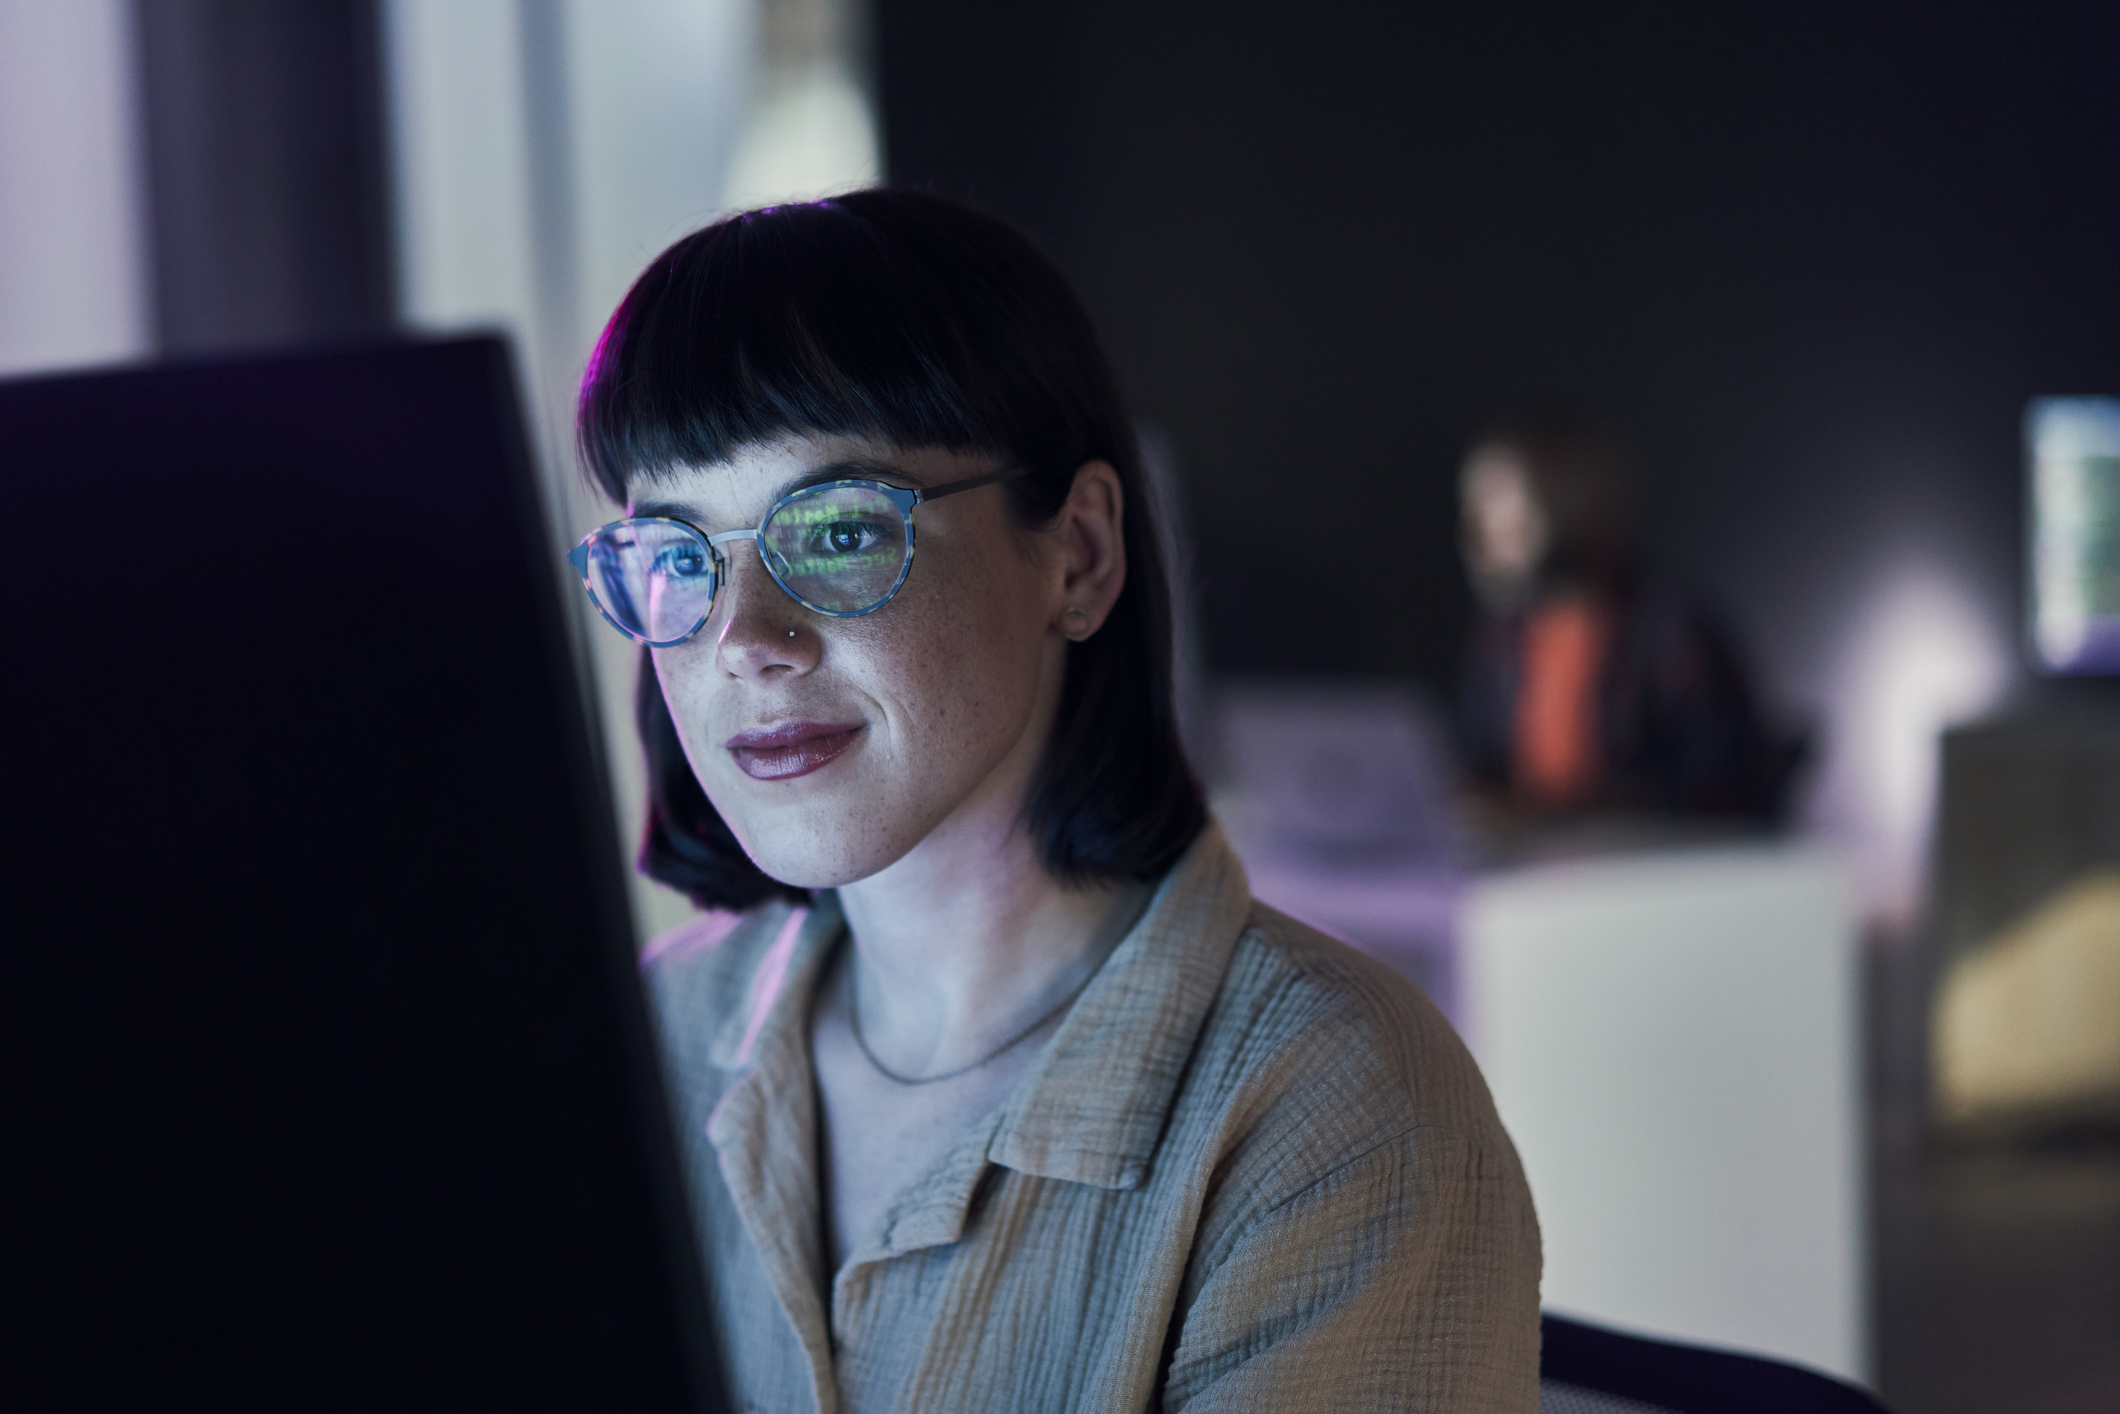 Woman with glasses smiling, working on a computer in an office setting